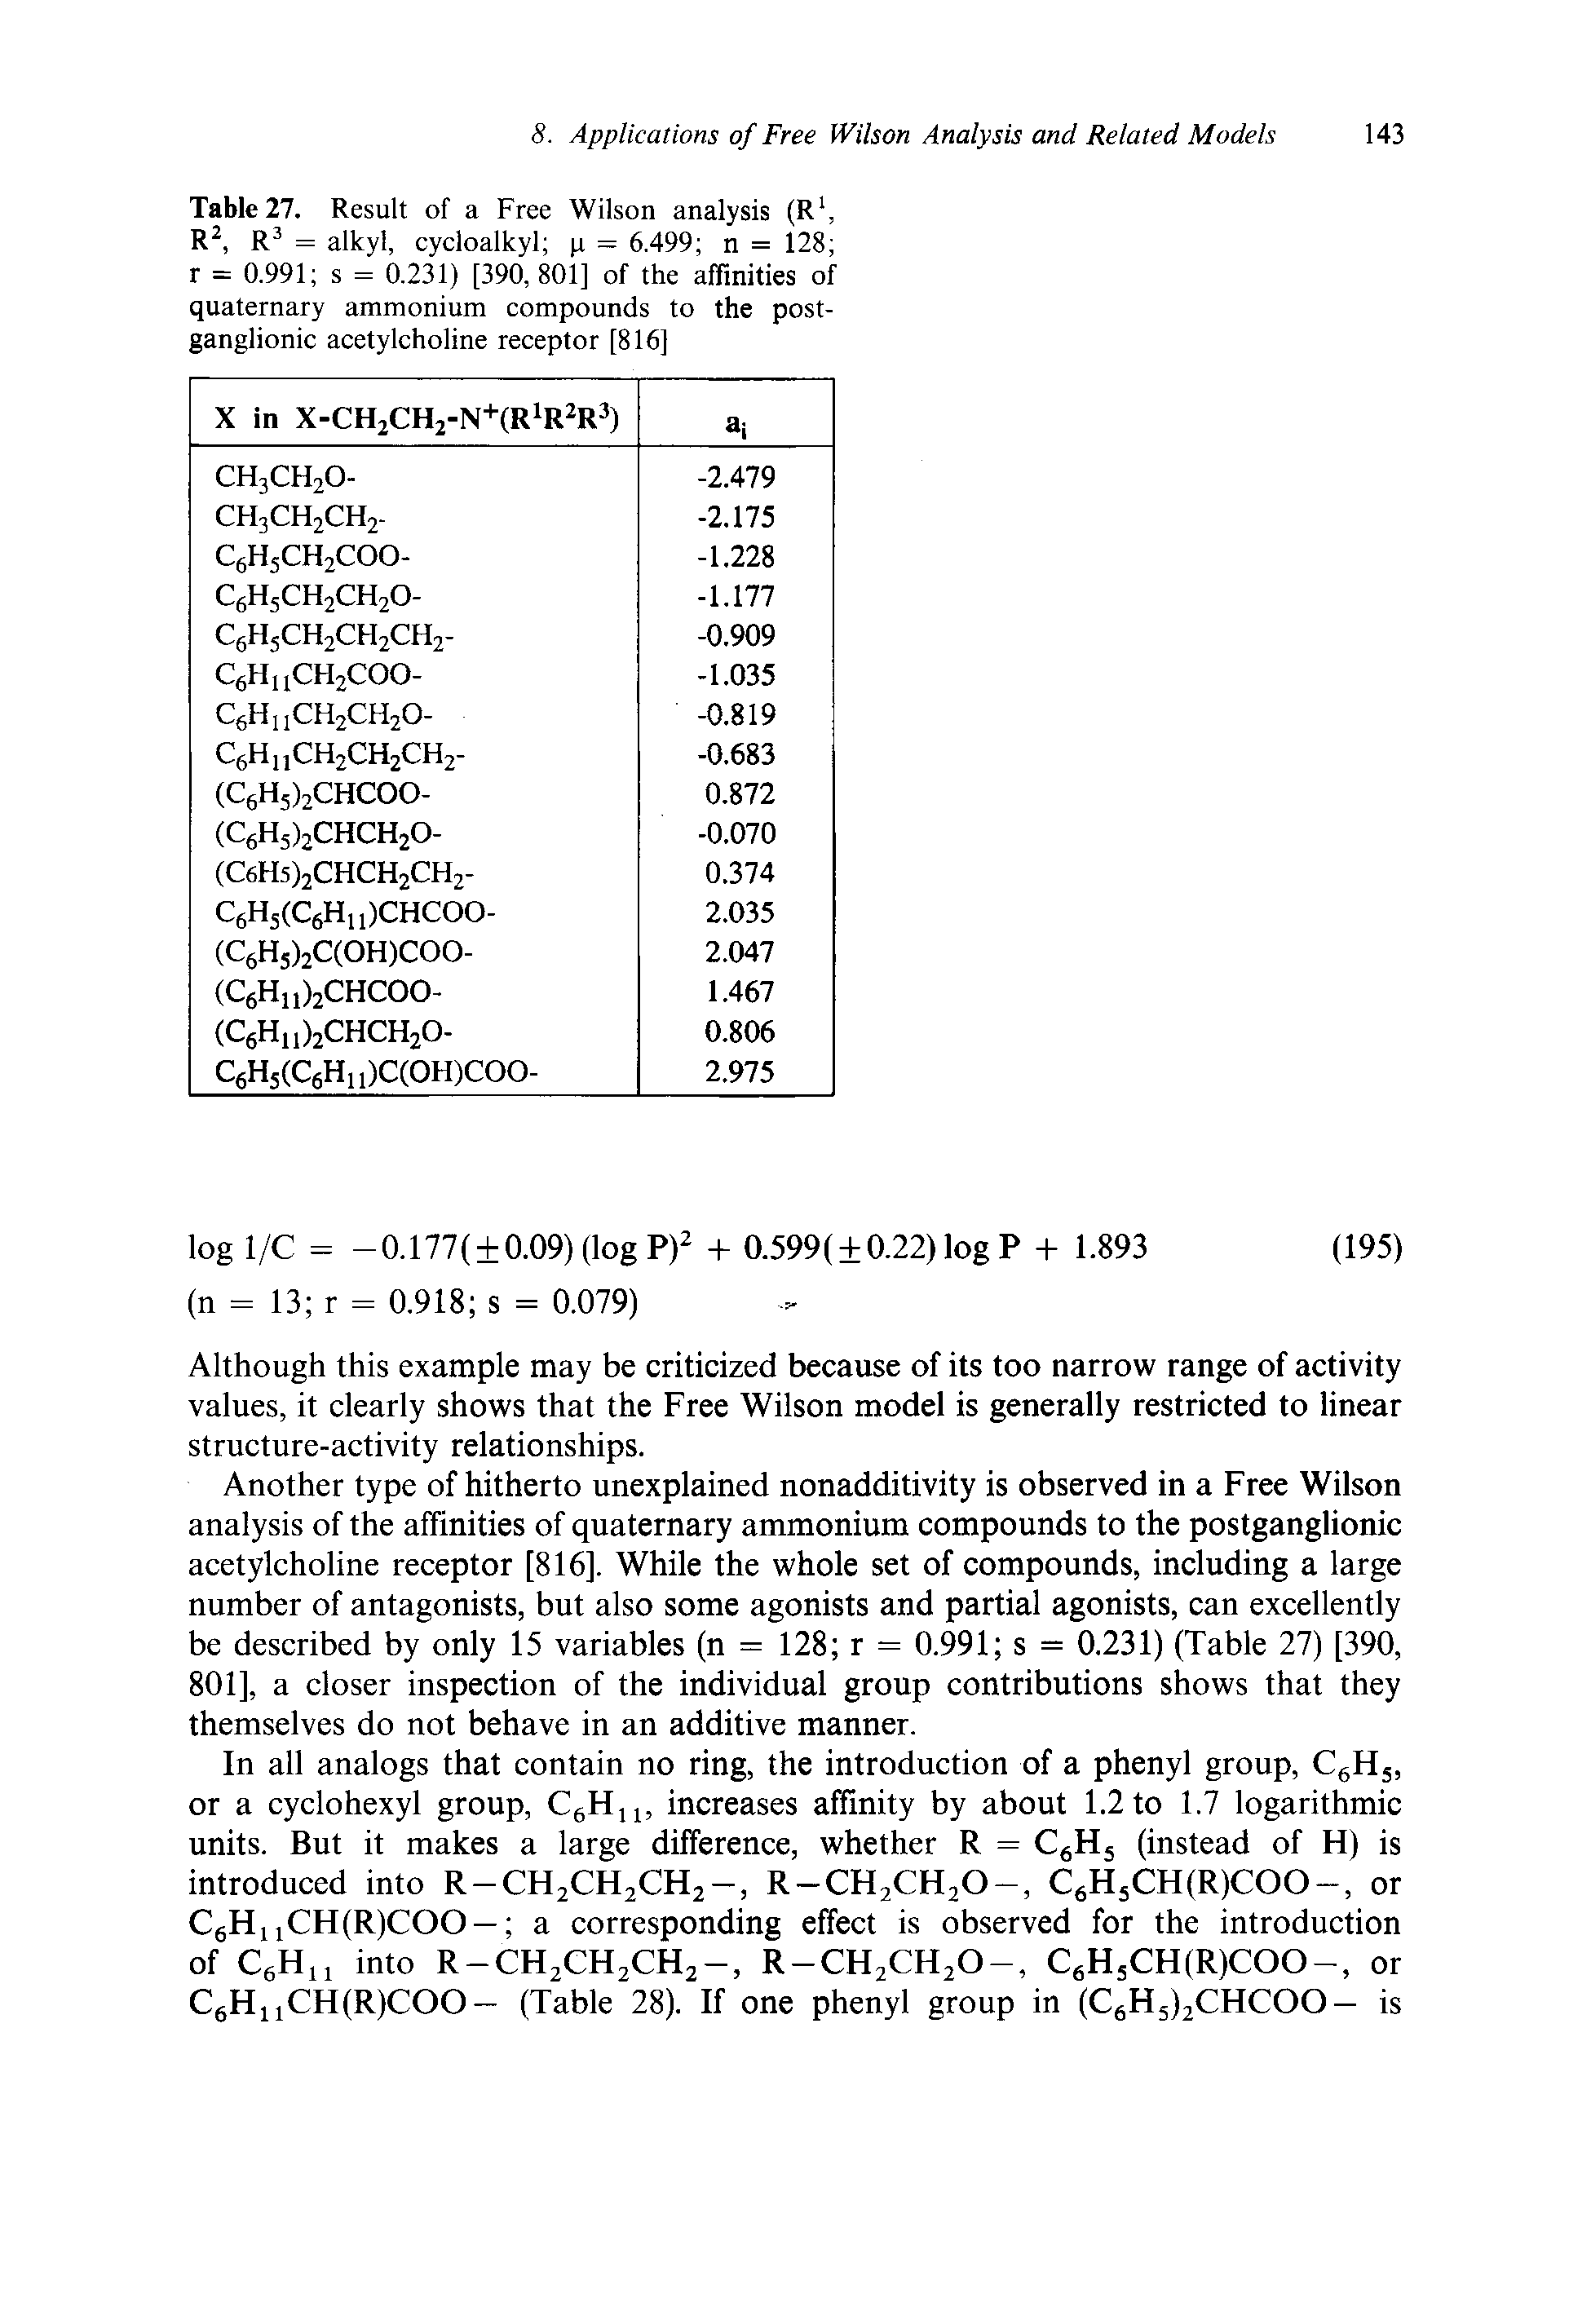 Table 27. Result of a Free Wilson analysis (R, R, R = alkyl, cycloalkyl n = 6.499 n = 128 r = 0.991 s = 0.231) [390, 801] of the affinities of quaternary ammonium compounds to the postganglionic acetylcholine receptor [816]...